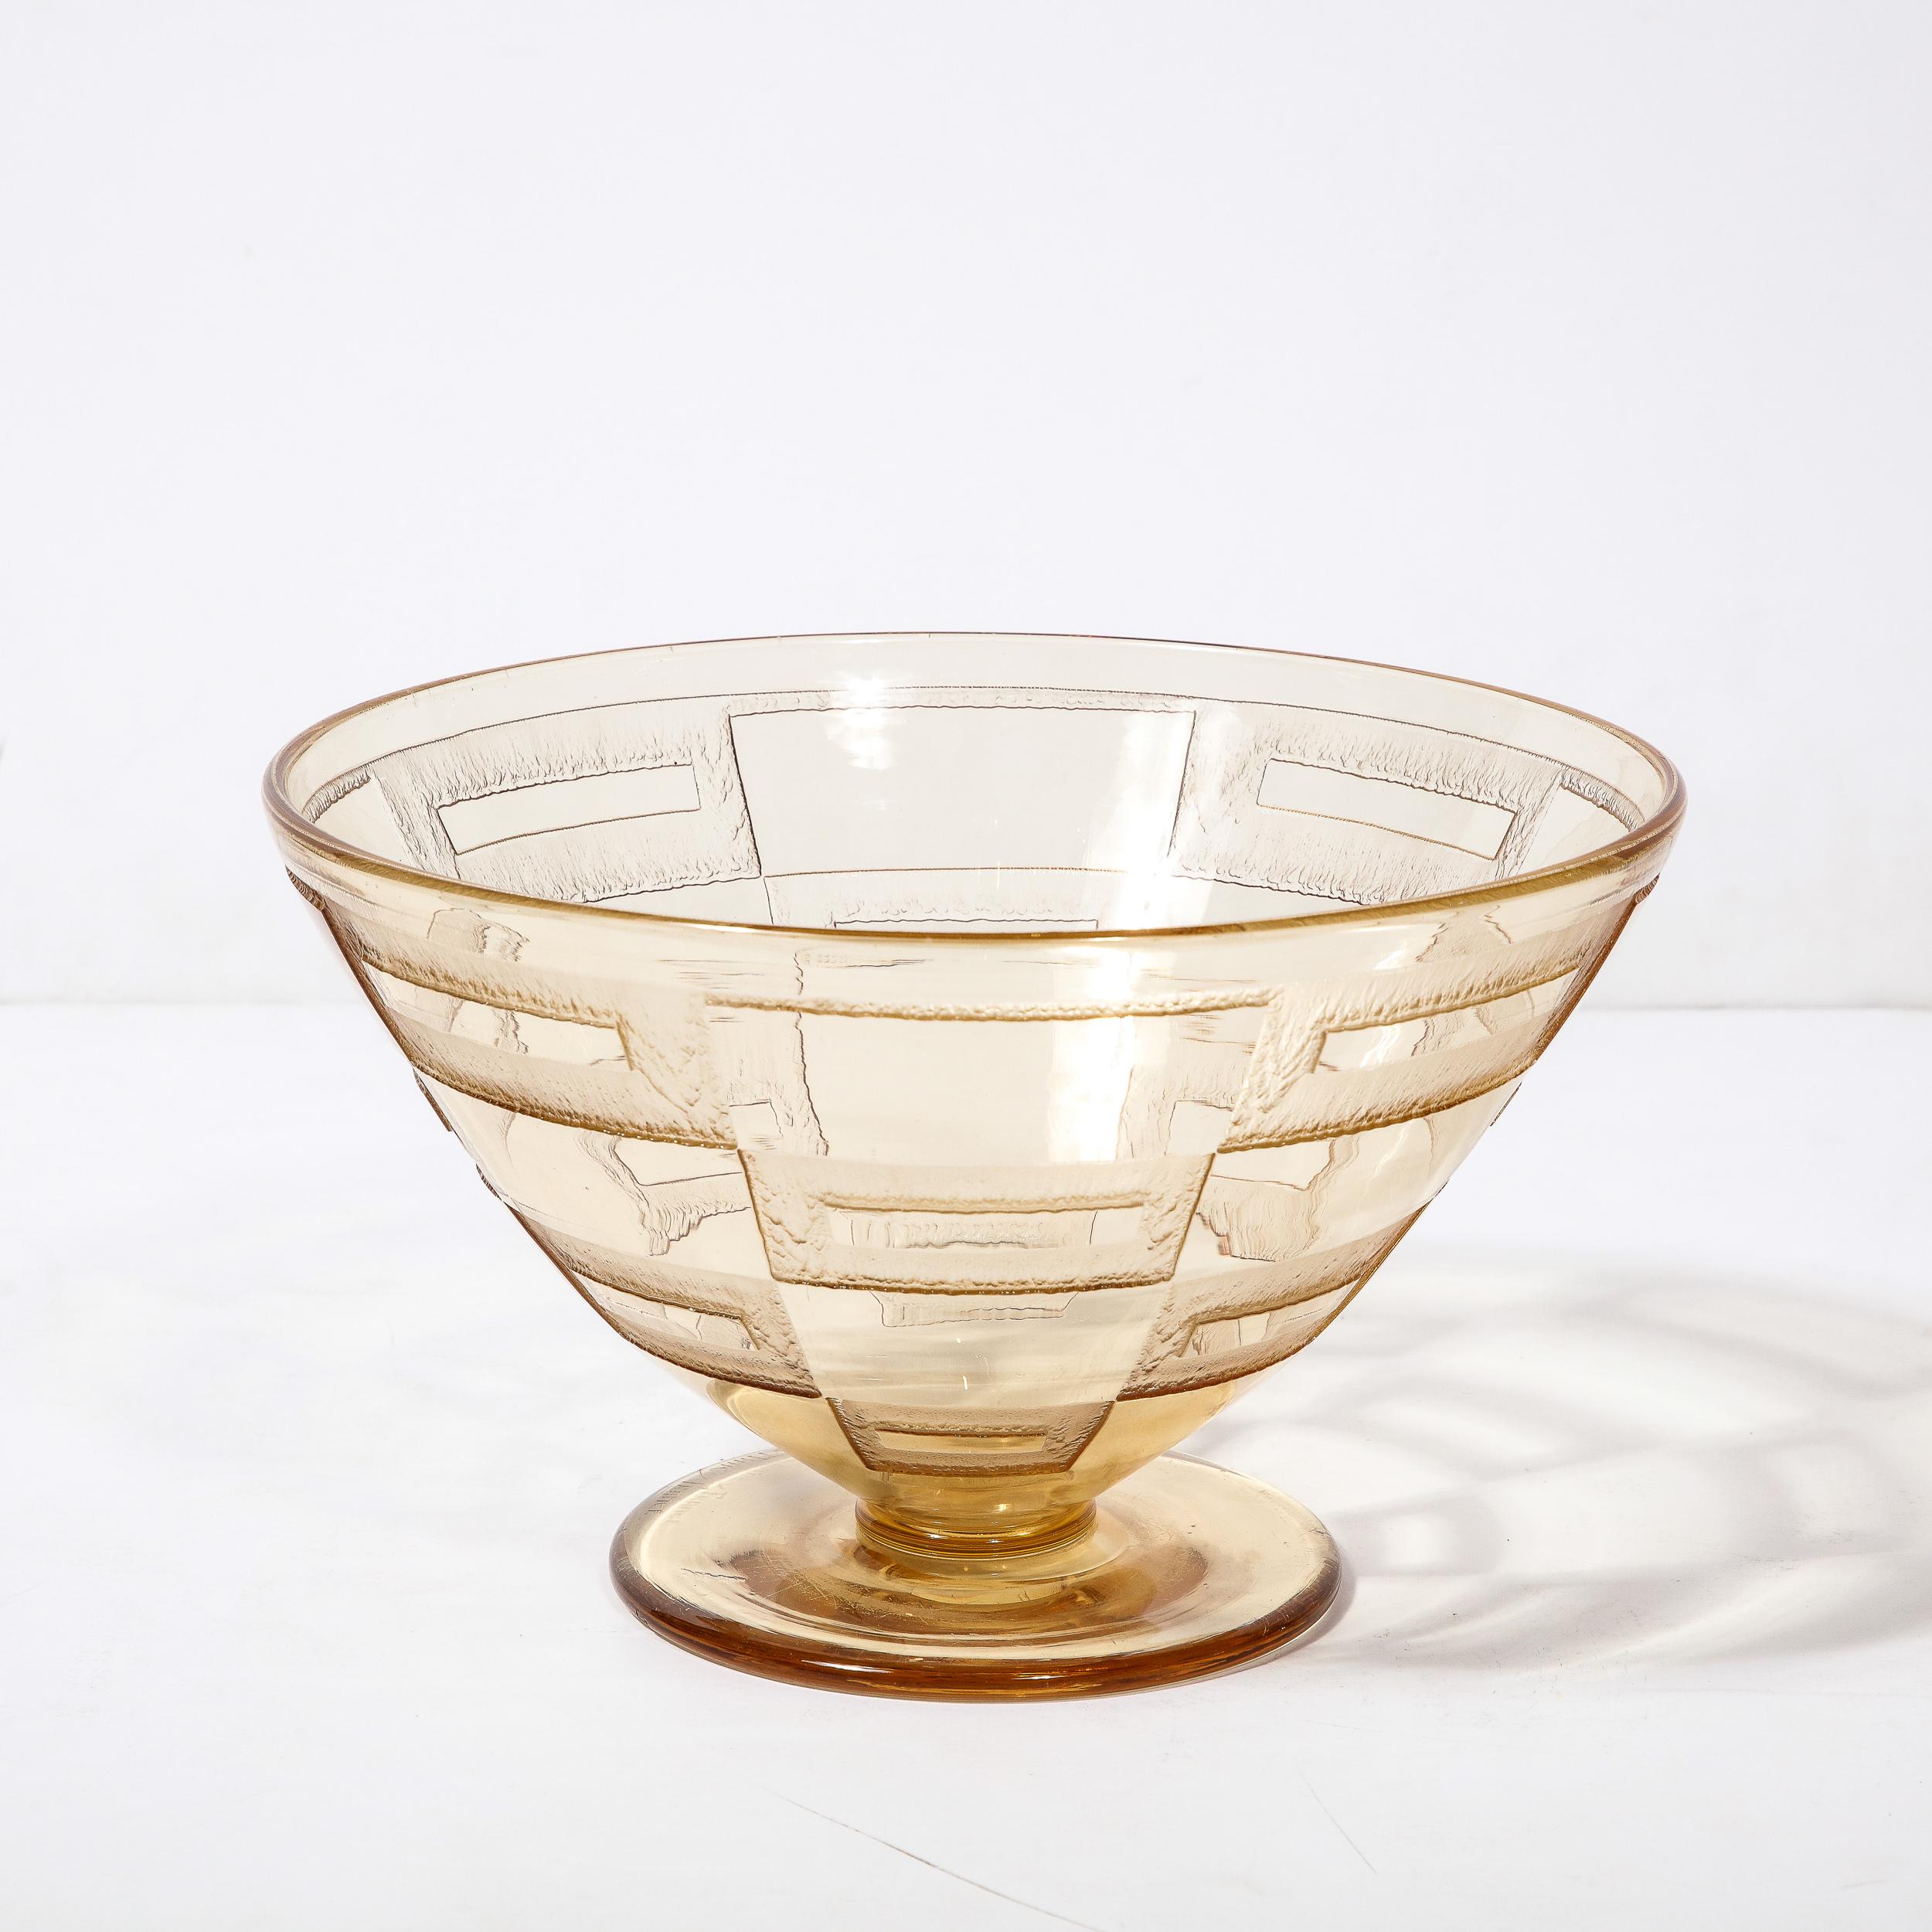 This Art deco Acid Etched Centerpiece bowl by the esteemed Art Glass Maker Daum originates from France, Circa 1930. Exquisite in all degrees, this radiant centerpiece features a gracefully tapered silhouette with a wide opening, smooth and subtly